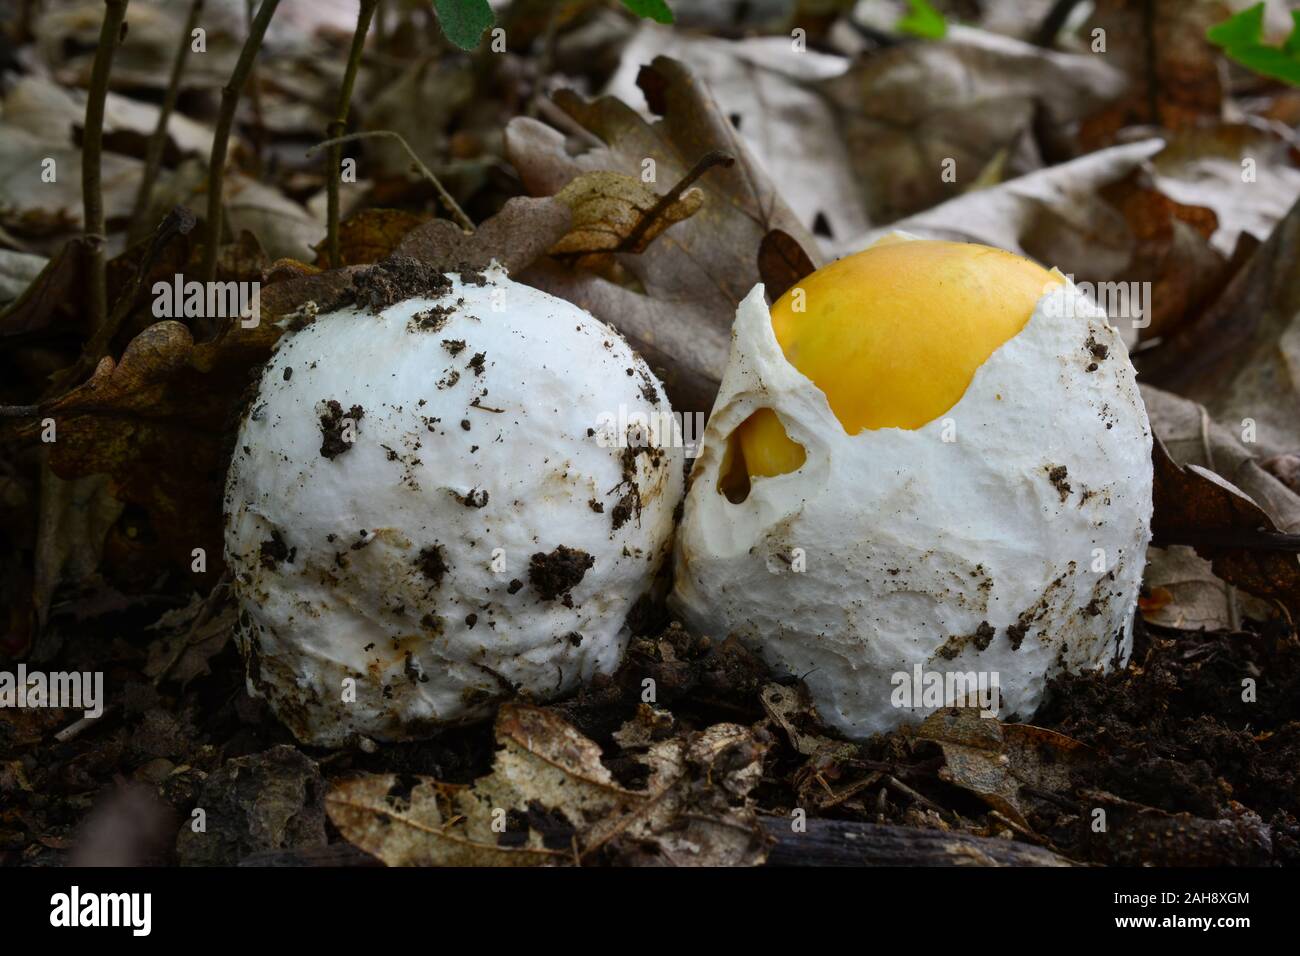 Two very young and healthy specimen of Amanita caesarea or Caesar's mushrooms, one of them still in the egg stage, the other partially opened, close u Stock Photo